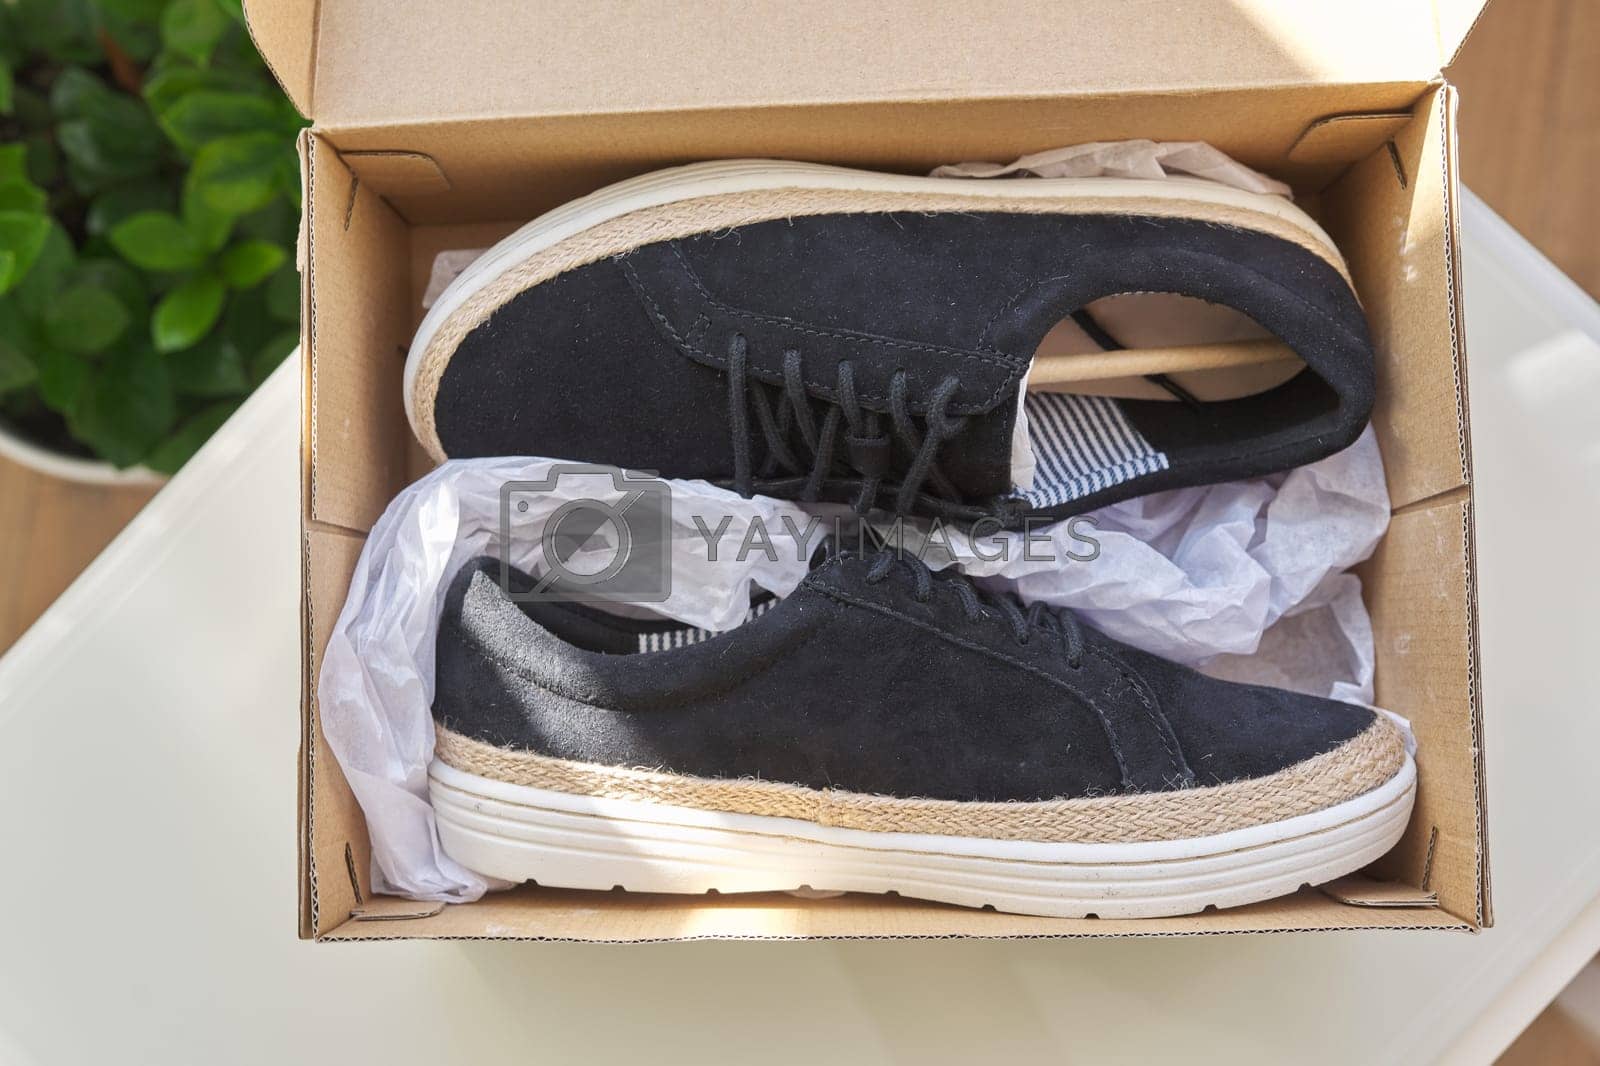 Royalty free image of New womens black natural suede sneakers in box at home by VH-studio